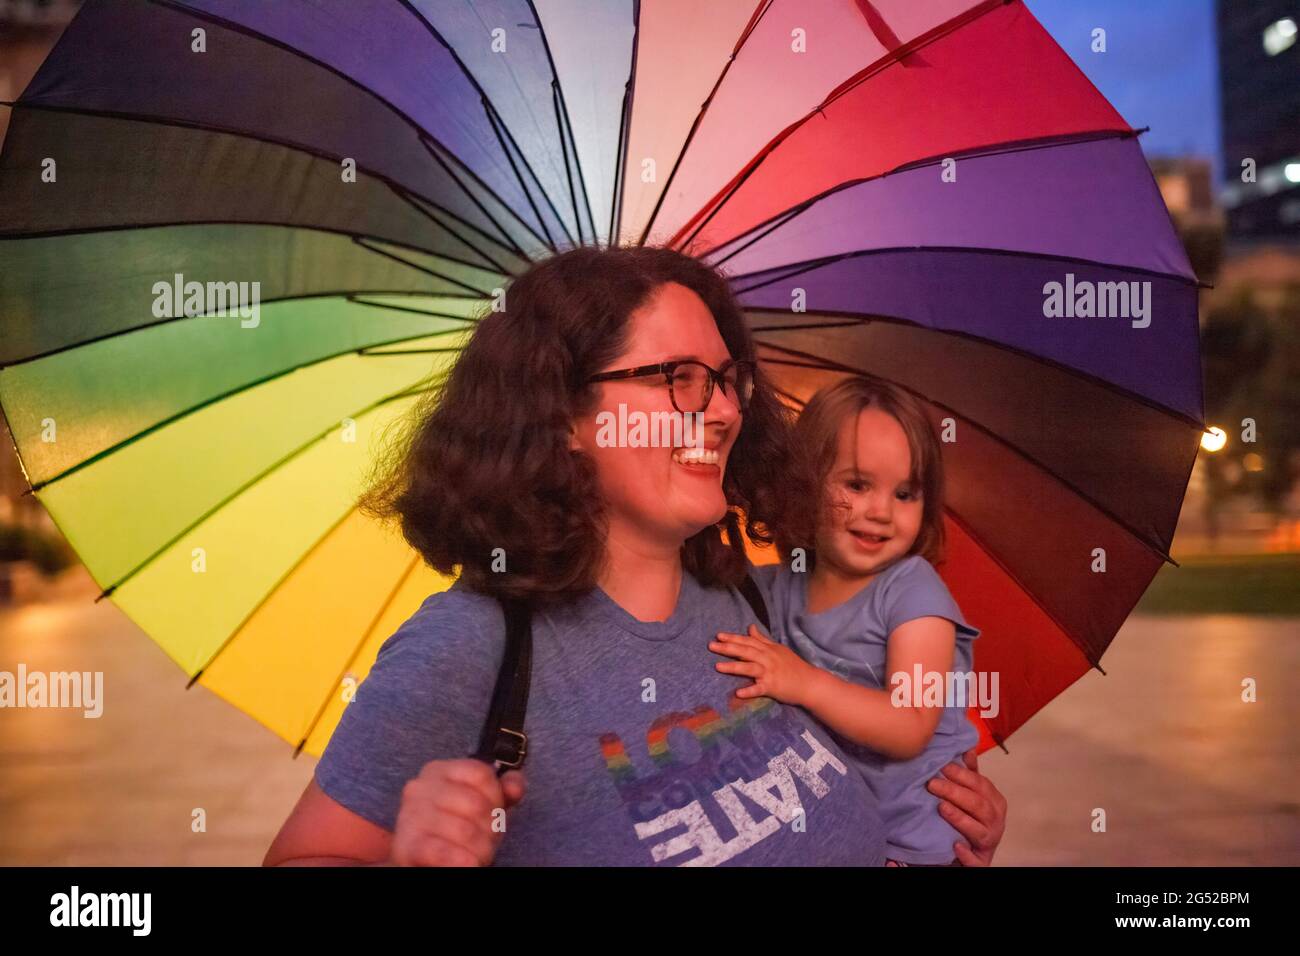 Anne Morric, 35, of Southern Columbus, Ohio stands with a rainbow umbrella for pride while carrying her three year old daughter Eleanor during a protest against Ohio legislation banning transgender women from female sports. Transgender rights advocates stood outside of the Ohio Statehouse to oppose and bring attention to an amendment to a bill that would ban transgender women from participating in high school and college women sports. The original bill that this transgender ban was added to dealt with compensation for college students to profit off of their name, image and likeness. The addit Stock Photo